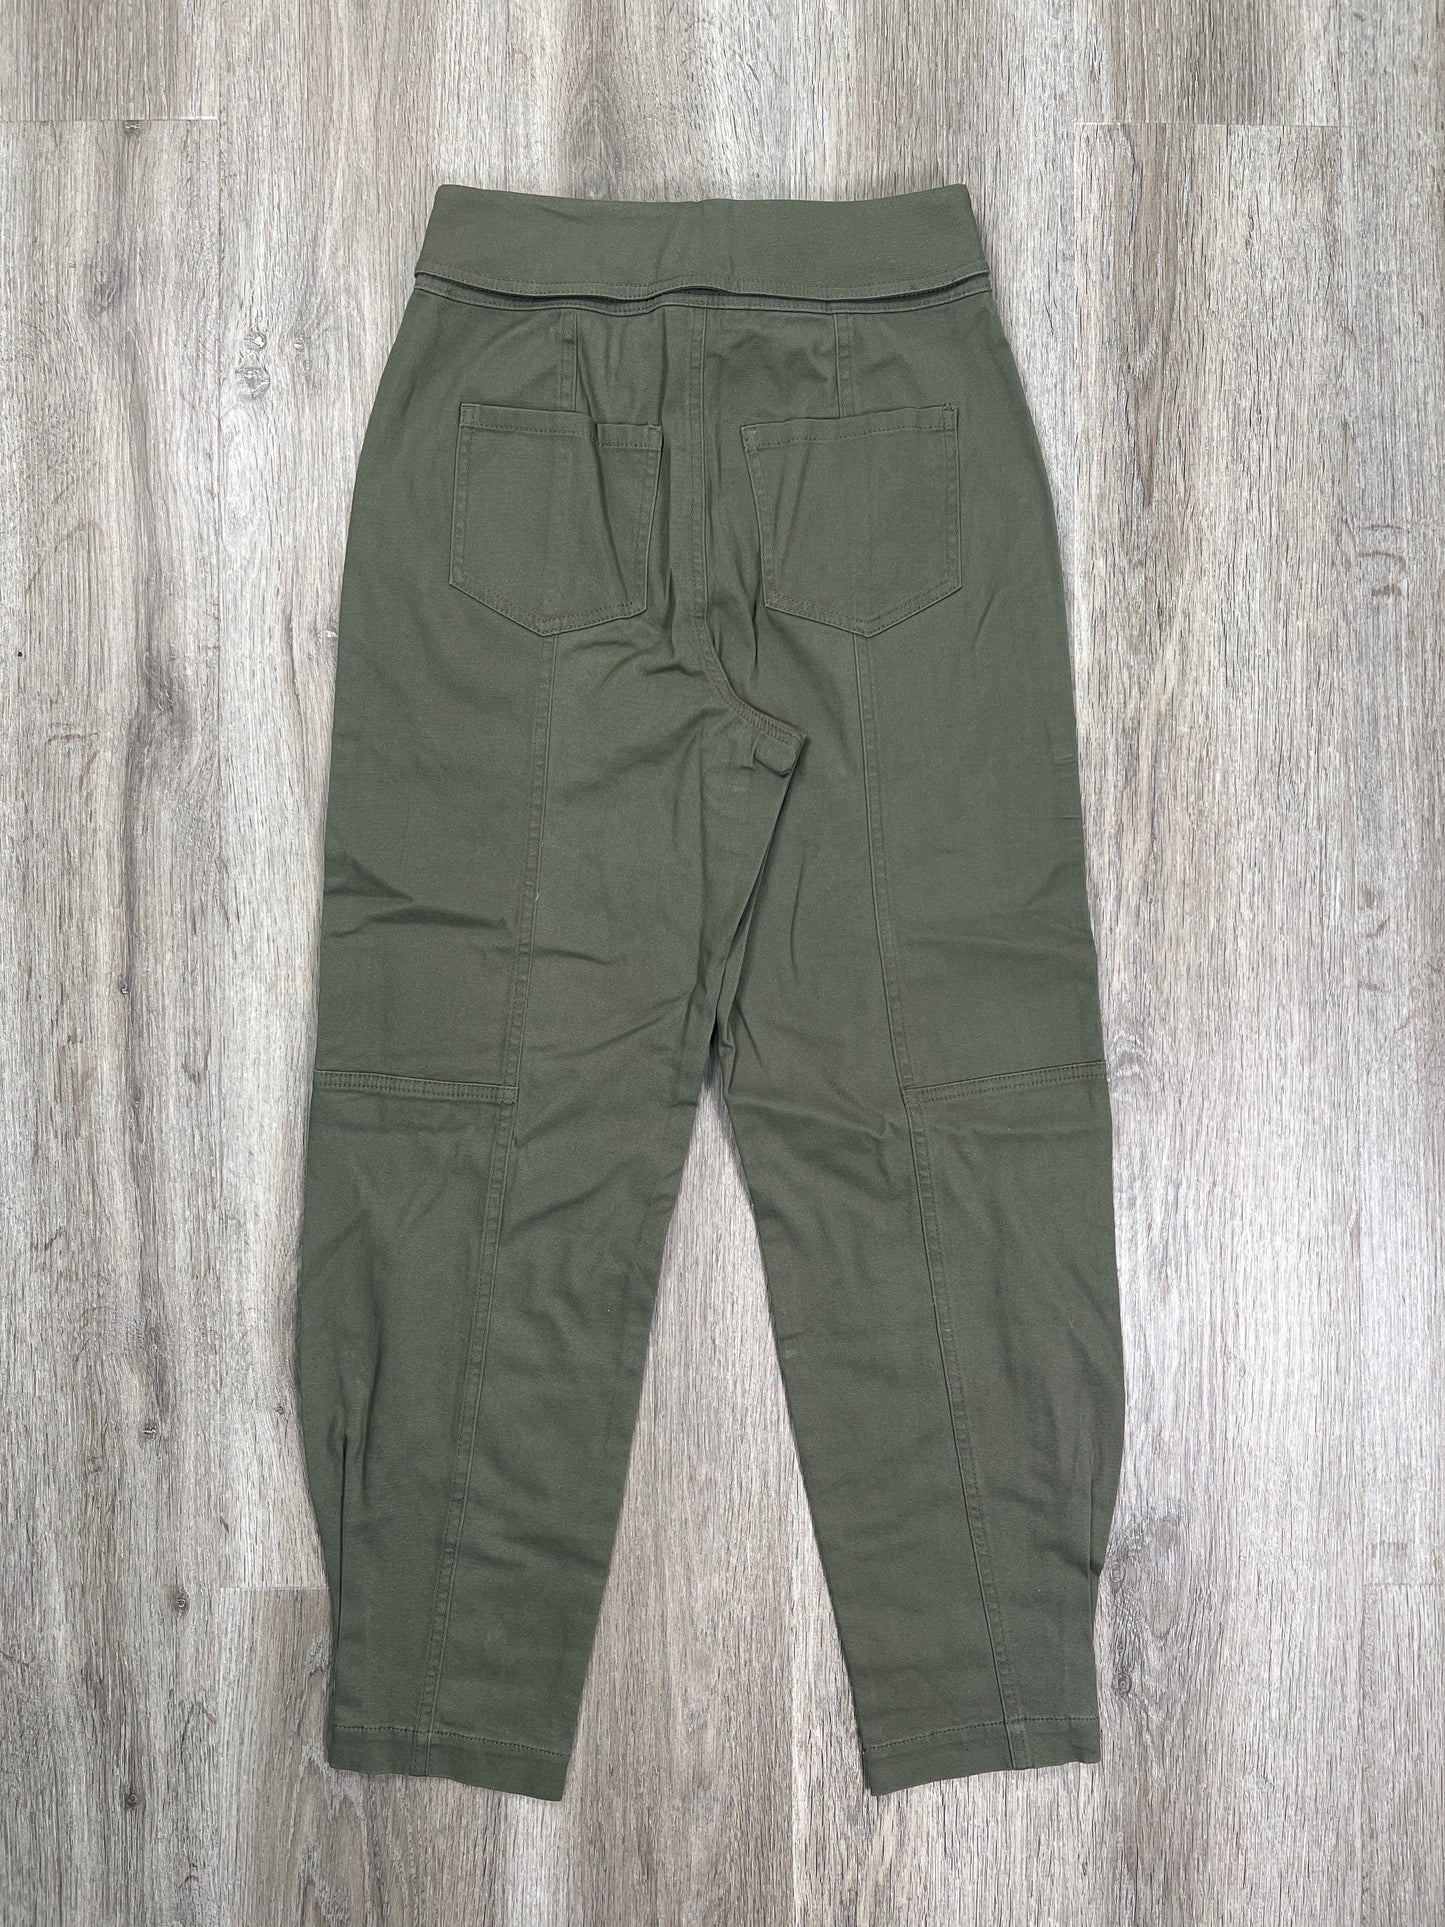 Pants Chinos & Khakis By Bar Iii  Size: S